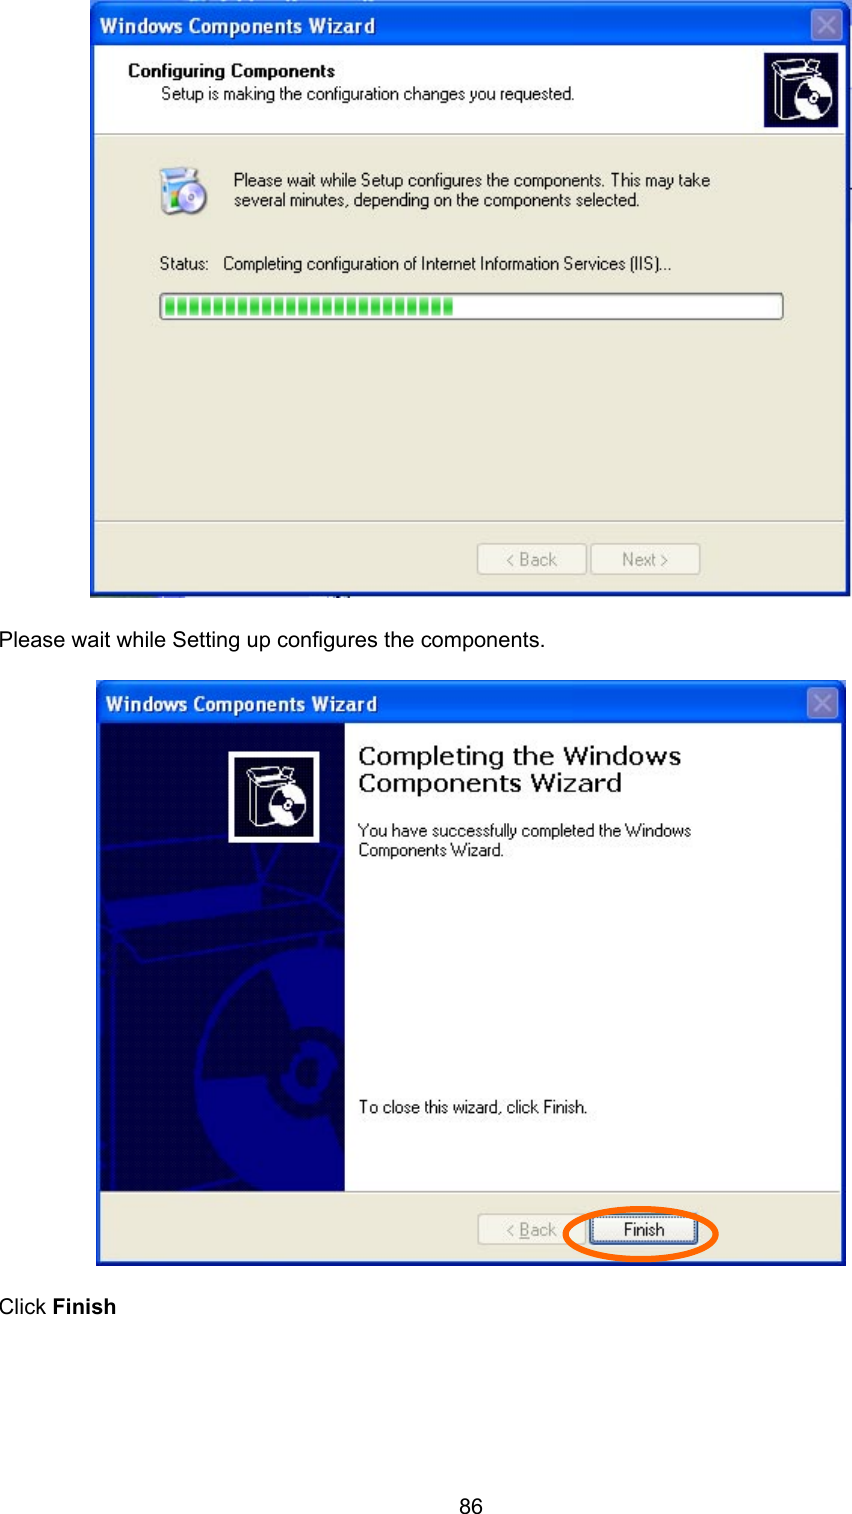  86  Please wait while Setting up configures the components. Click Finish 